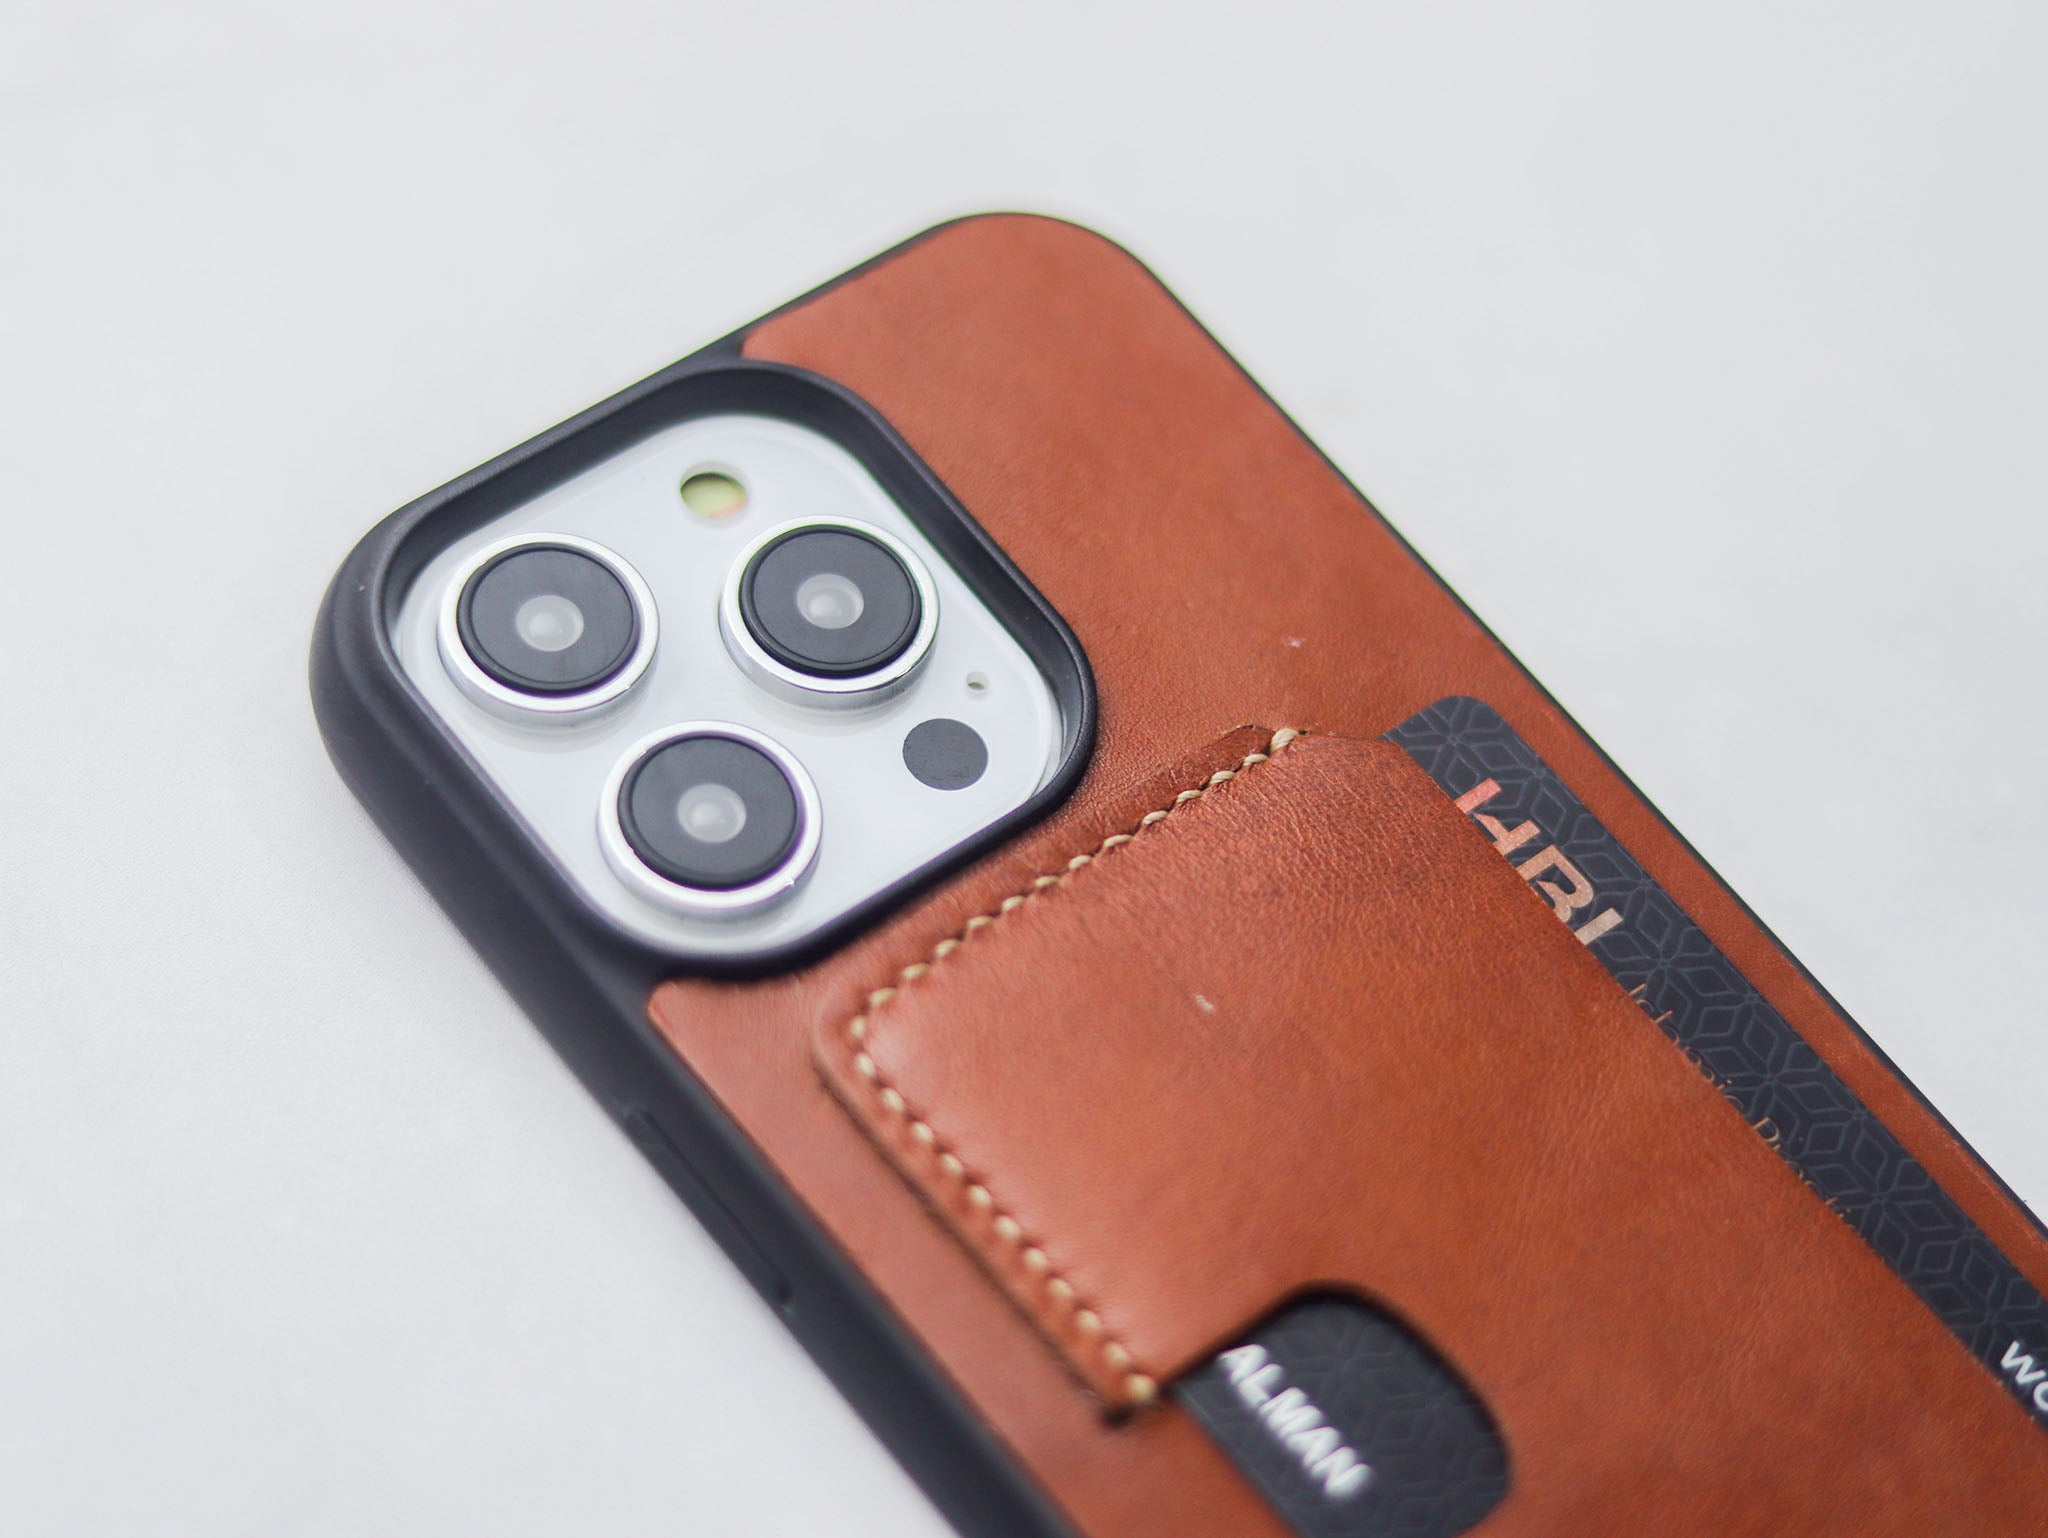 TAN BROWN LEATHER - WALLET PHONE CASE